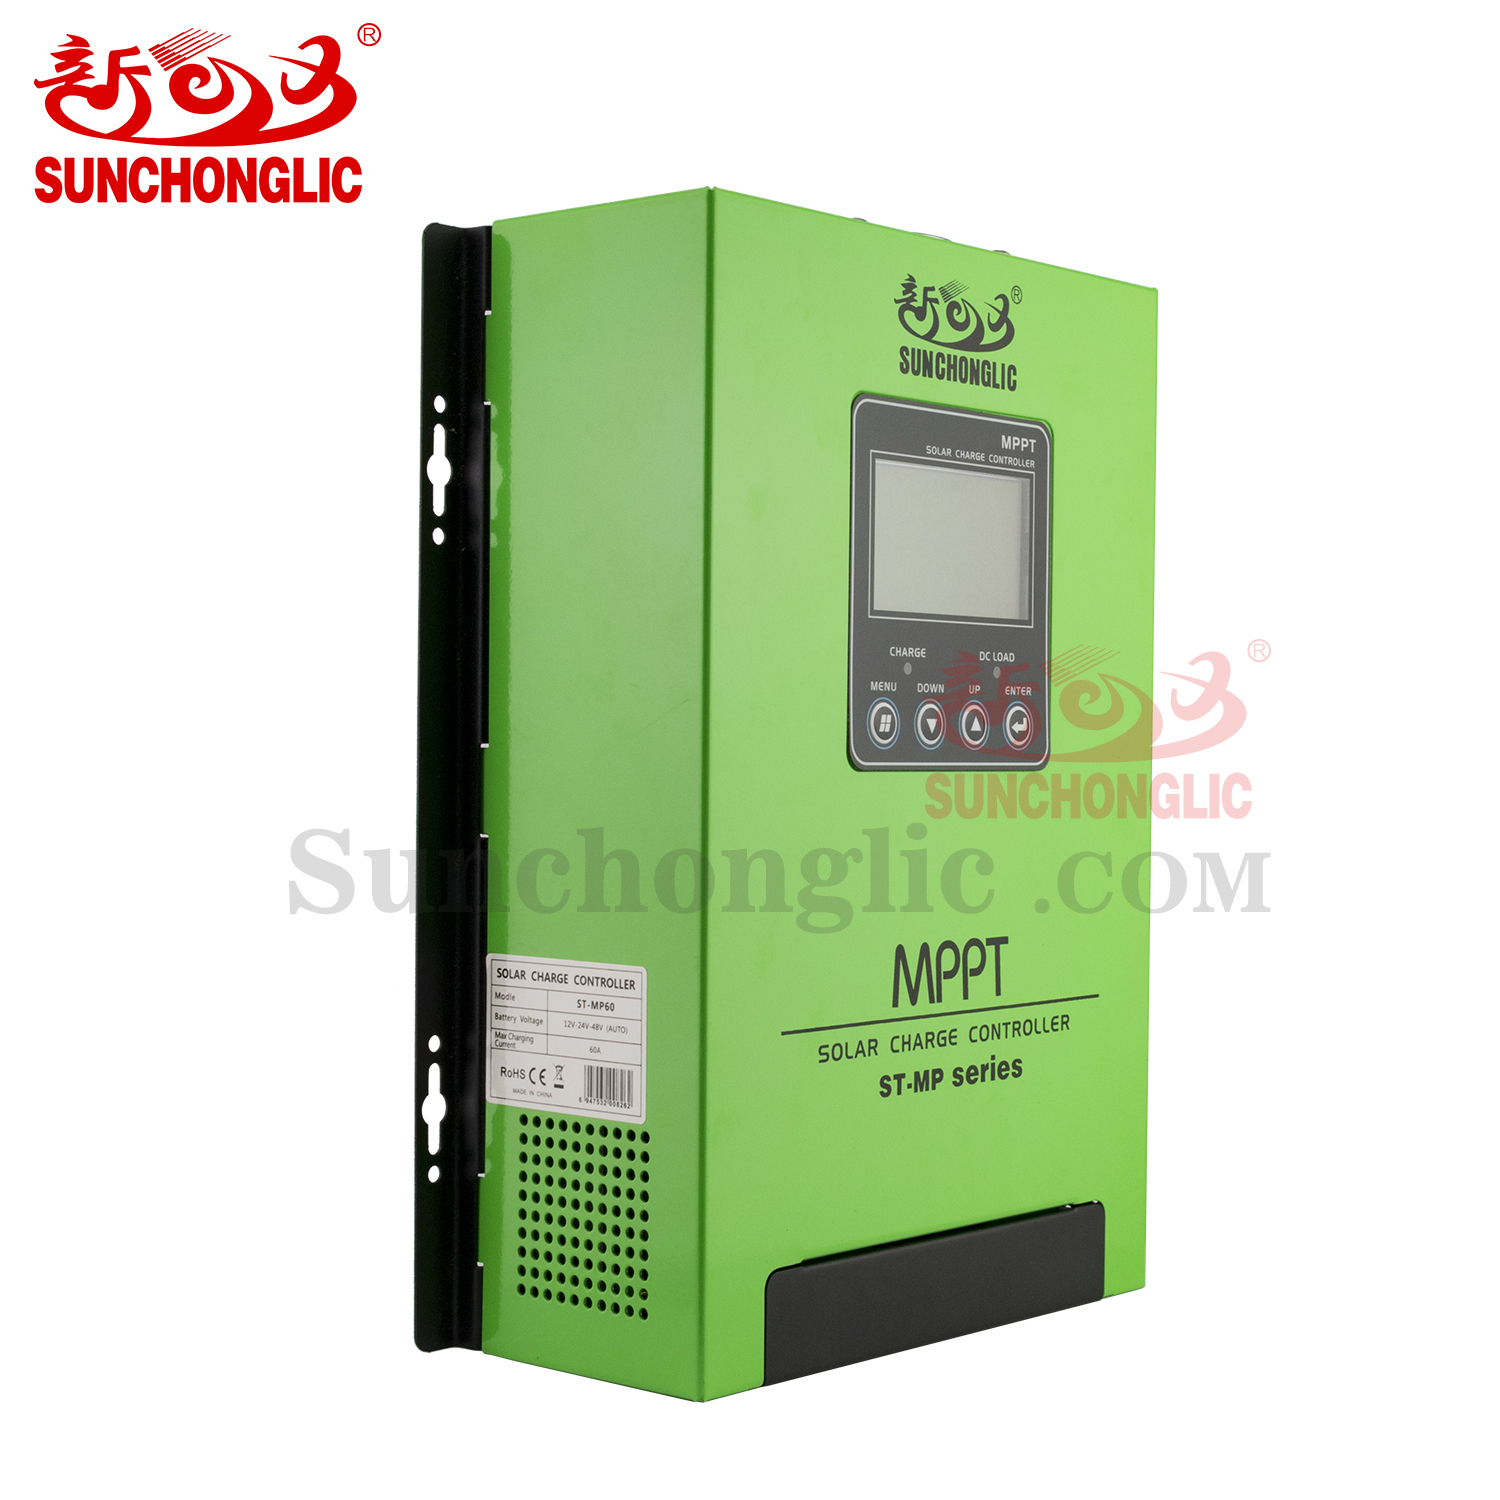 MPPT Solar Charge Controller - FT-MP-60A